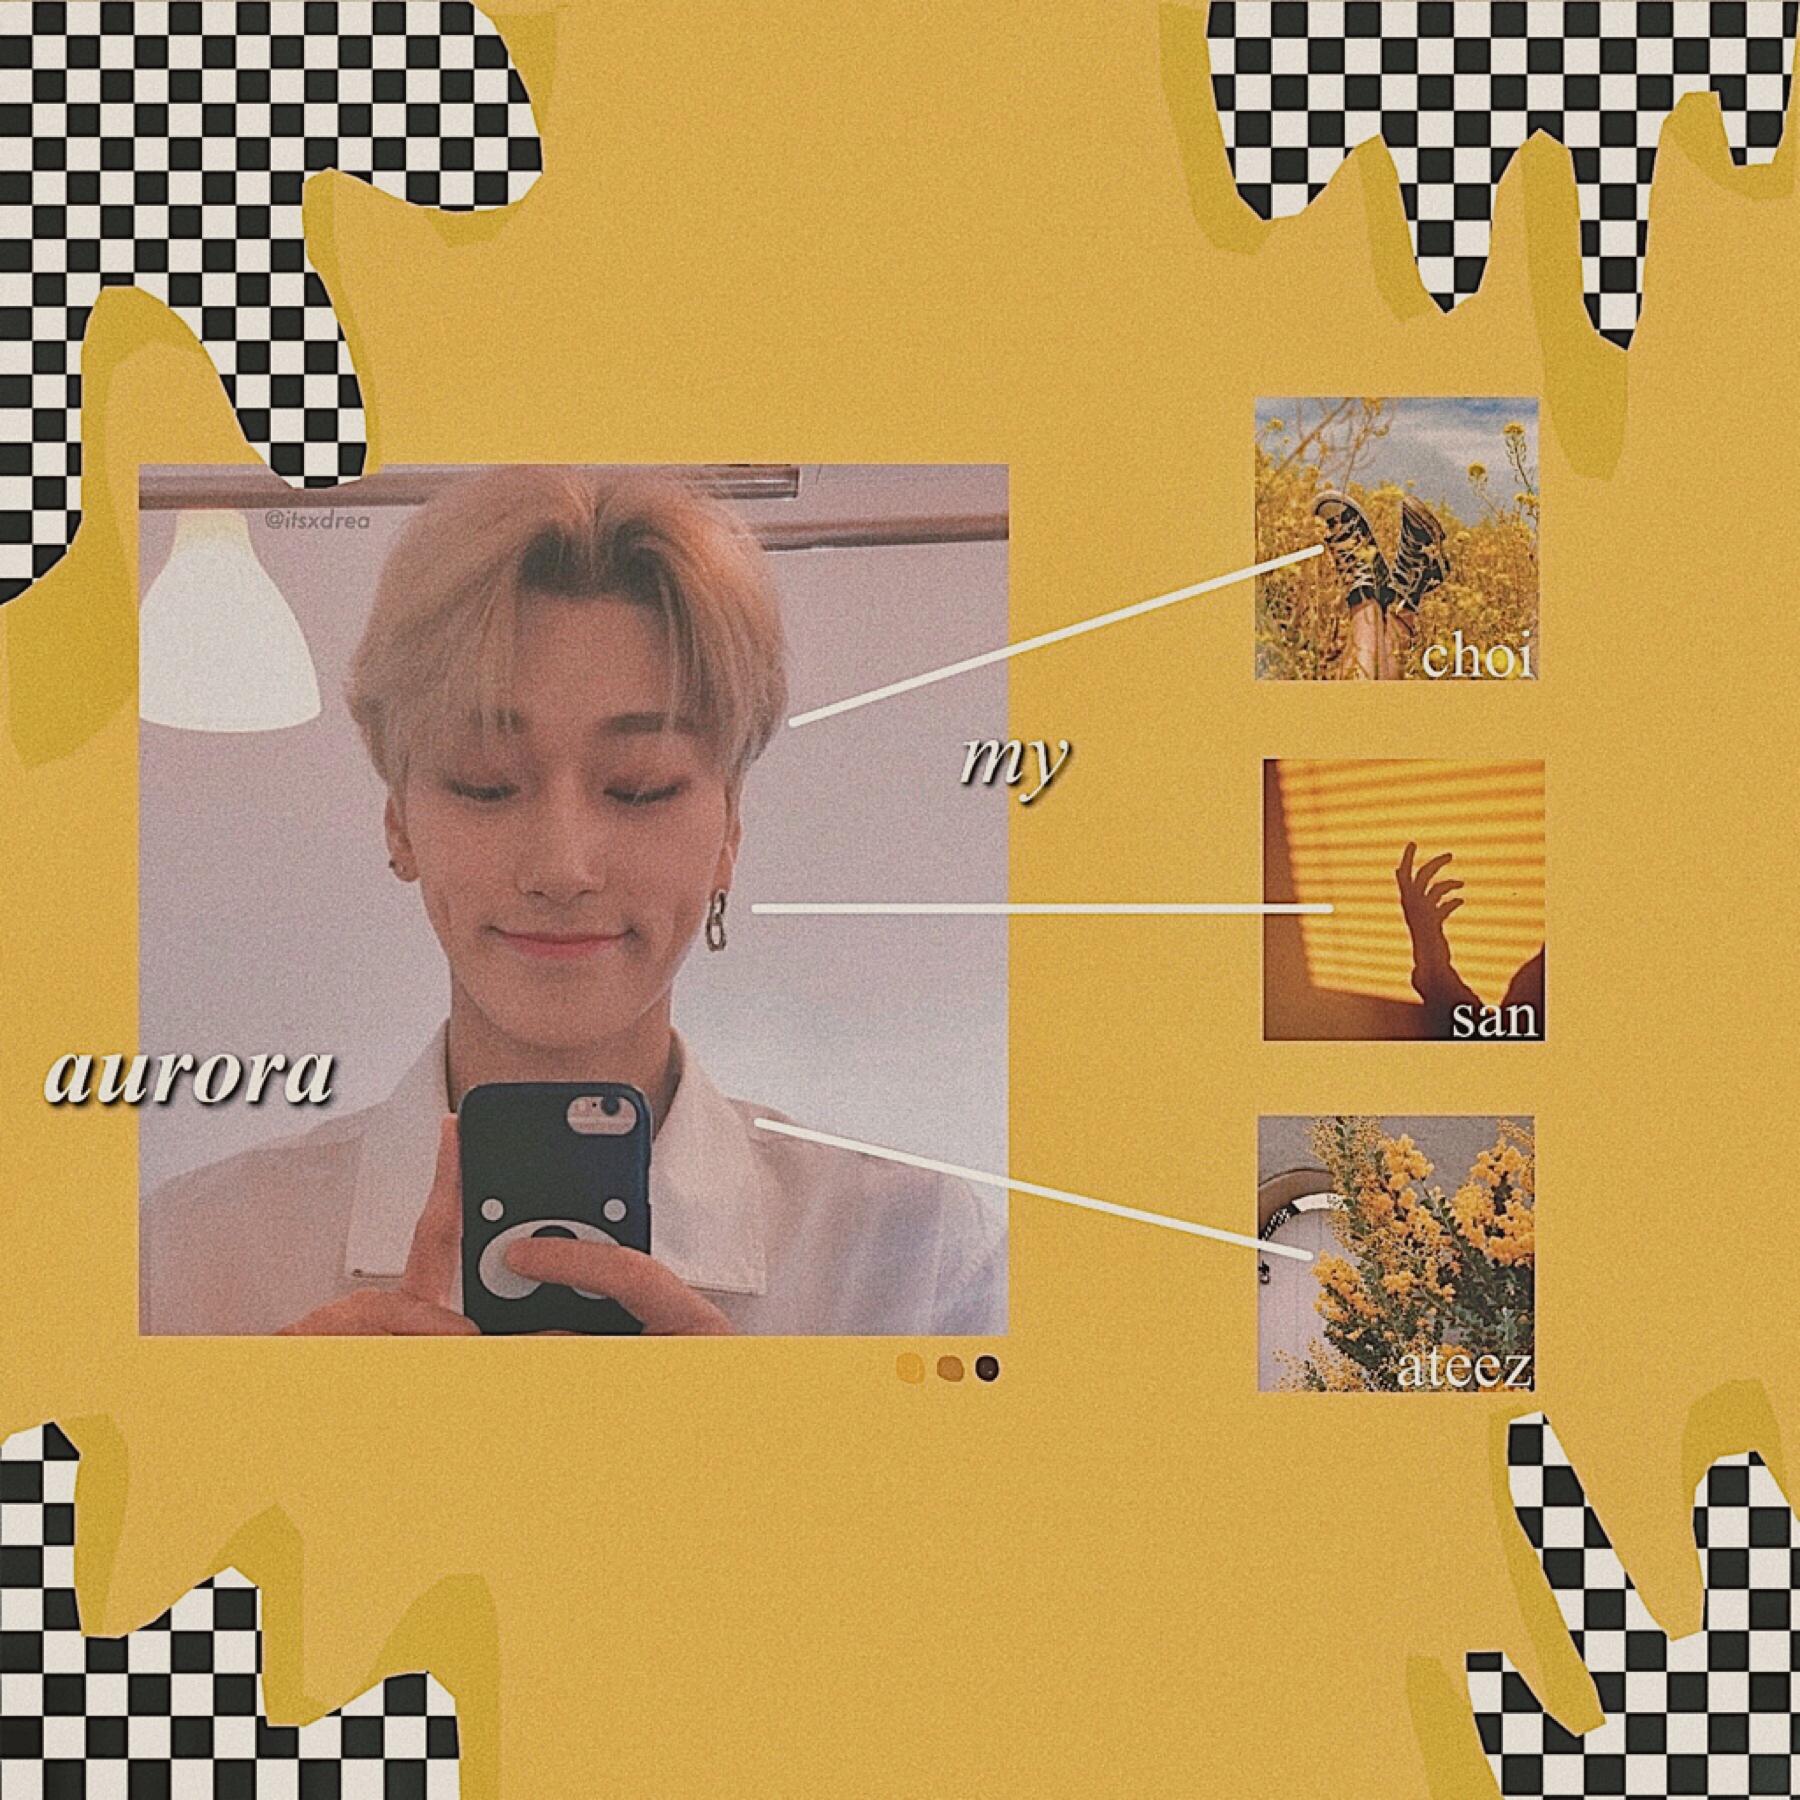 🌻
• choi san // ateez •
> edit request for @multistan_ <
omg i really wanna pre-order superm’s new album, but i’m broke 😻 ALSO WEAR YOUR MASK P L E A S E 🙈🥰